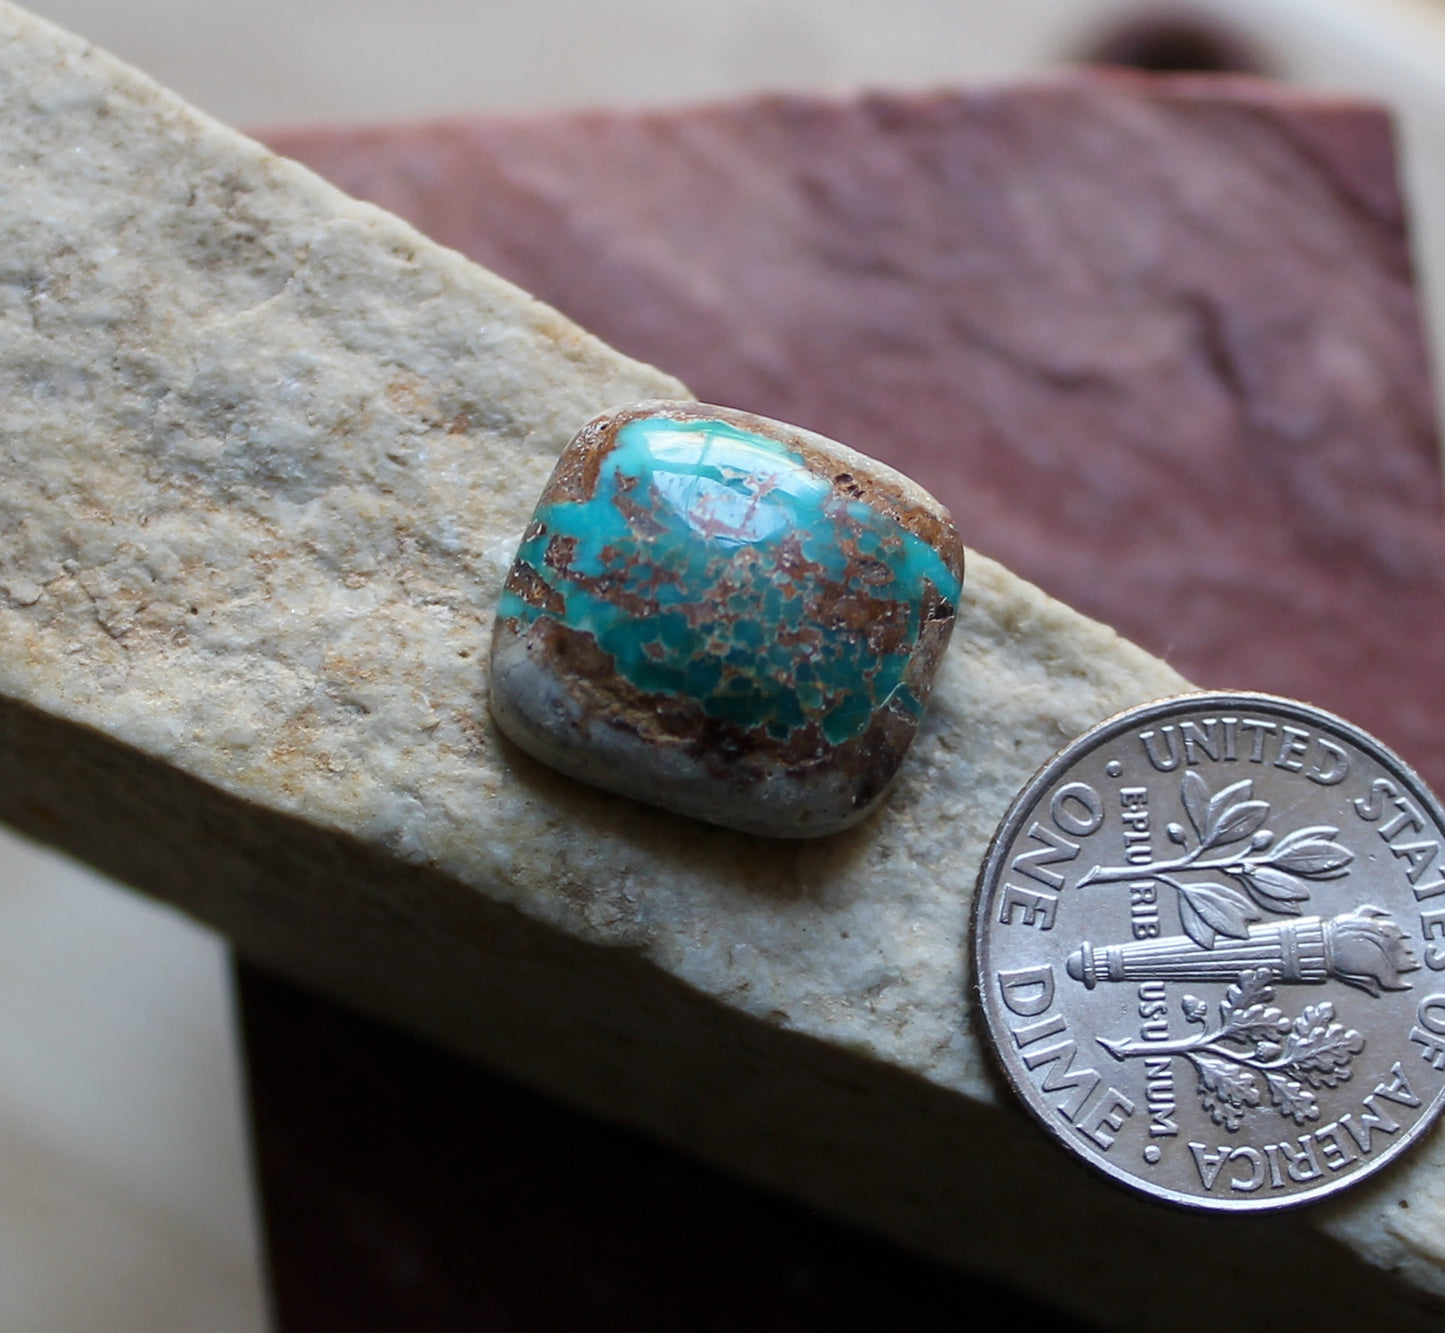 10 carat boulder cut Stone Mountain Turquoise cabochon with red matrix